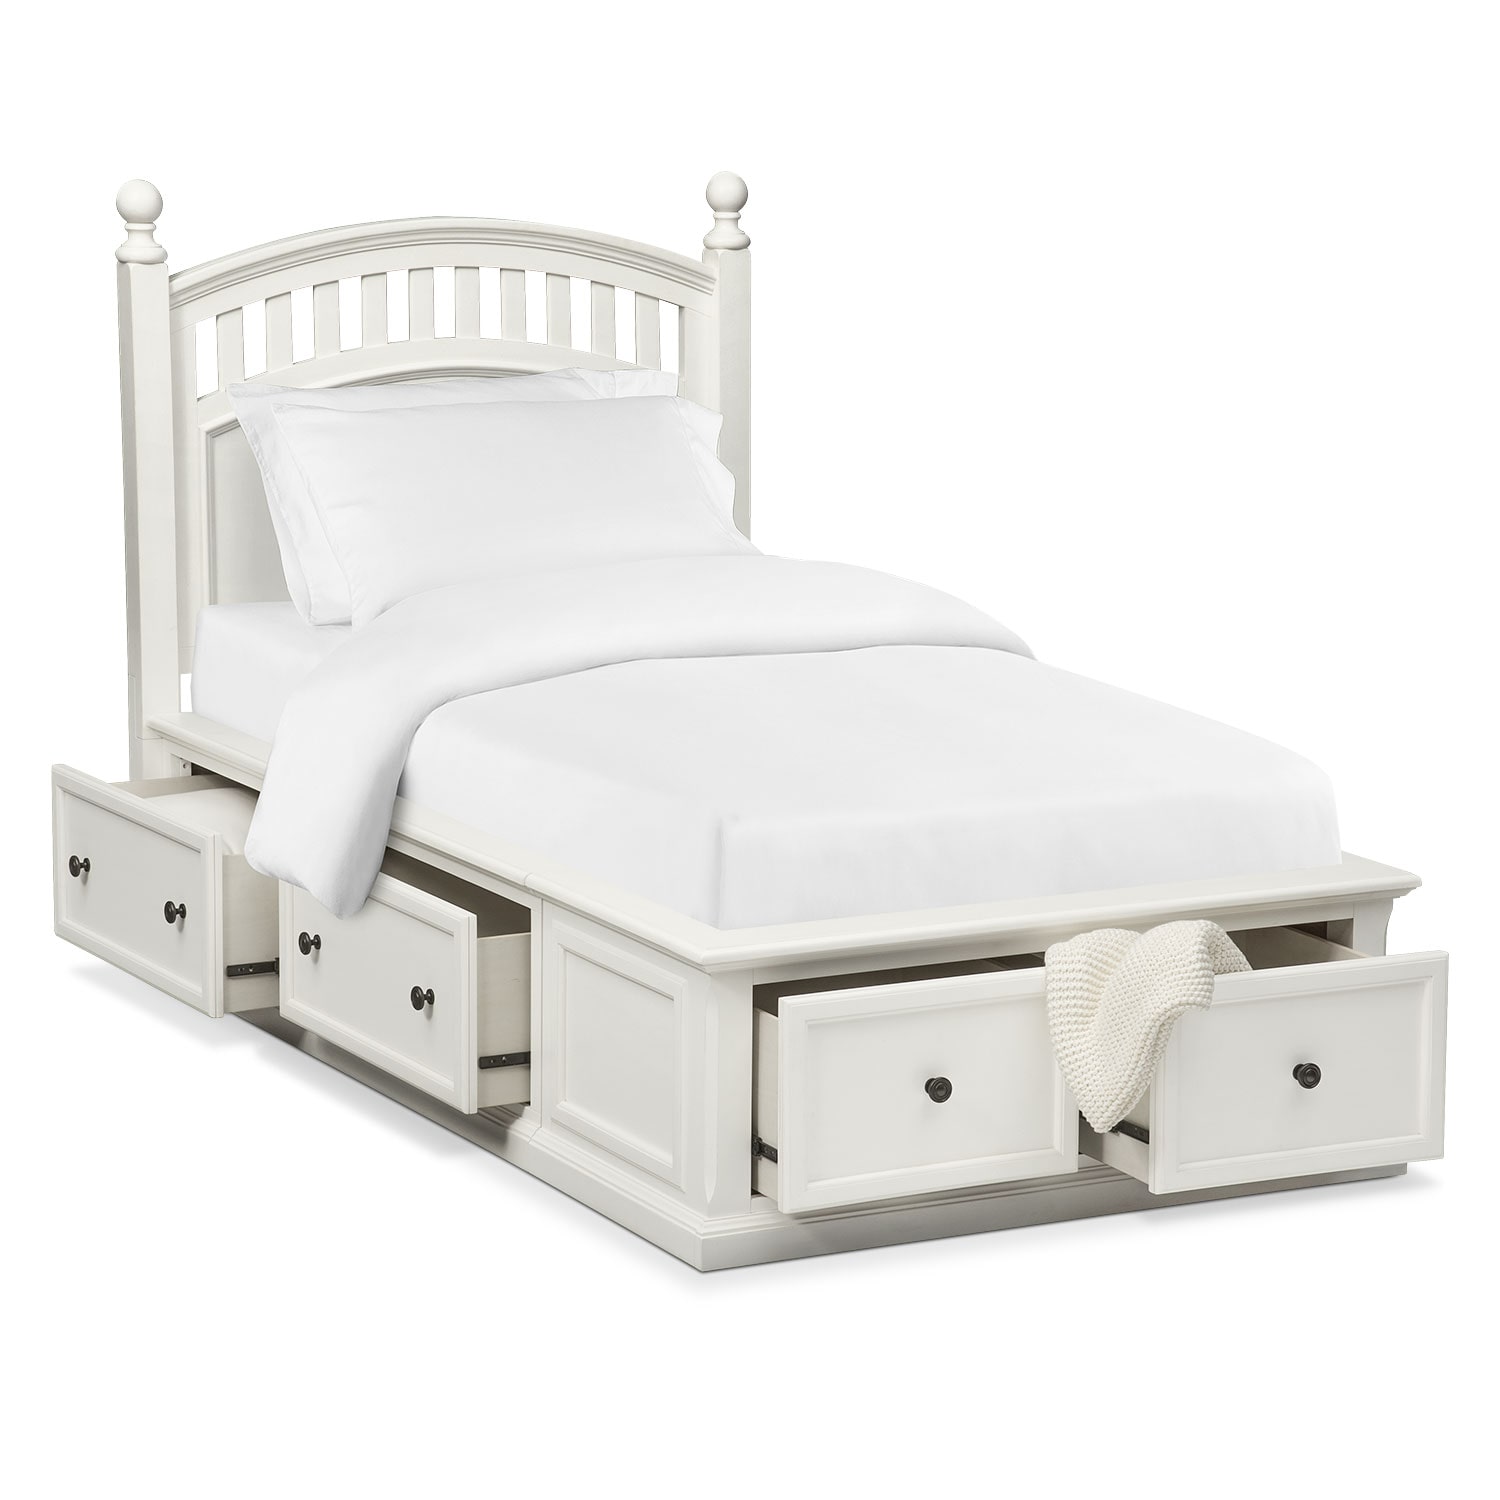 Hanover Youth Twin Poster Bed with Storage - White | Value ...